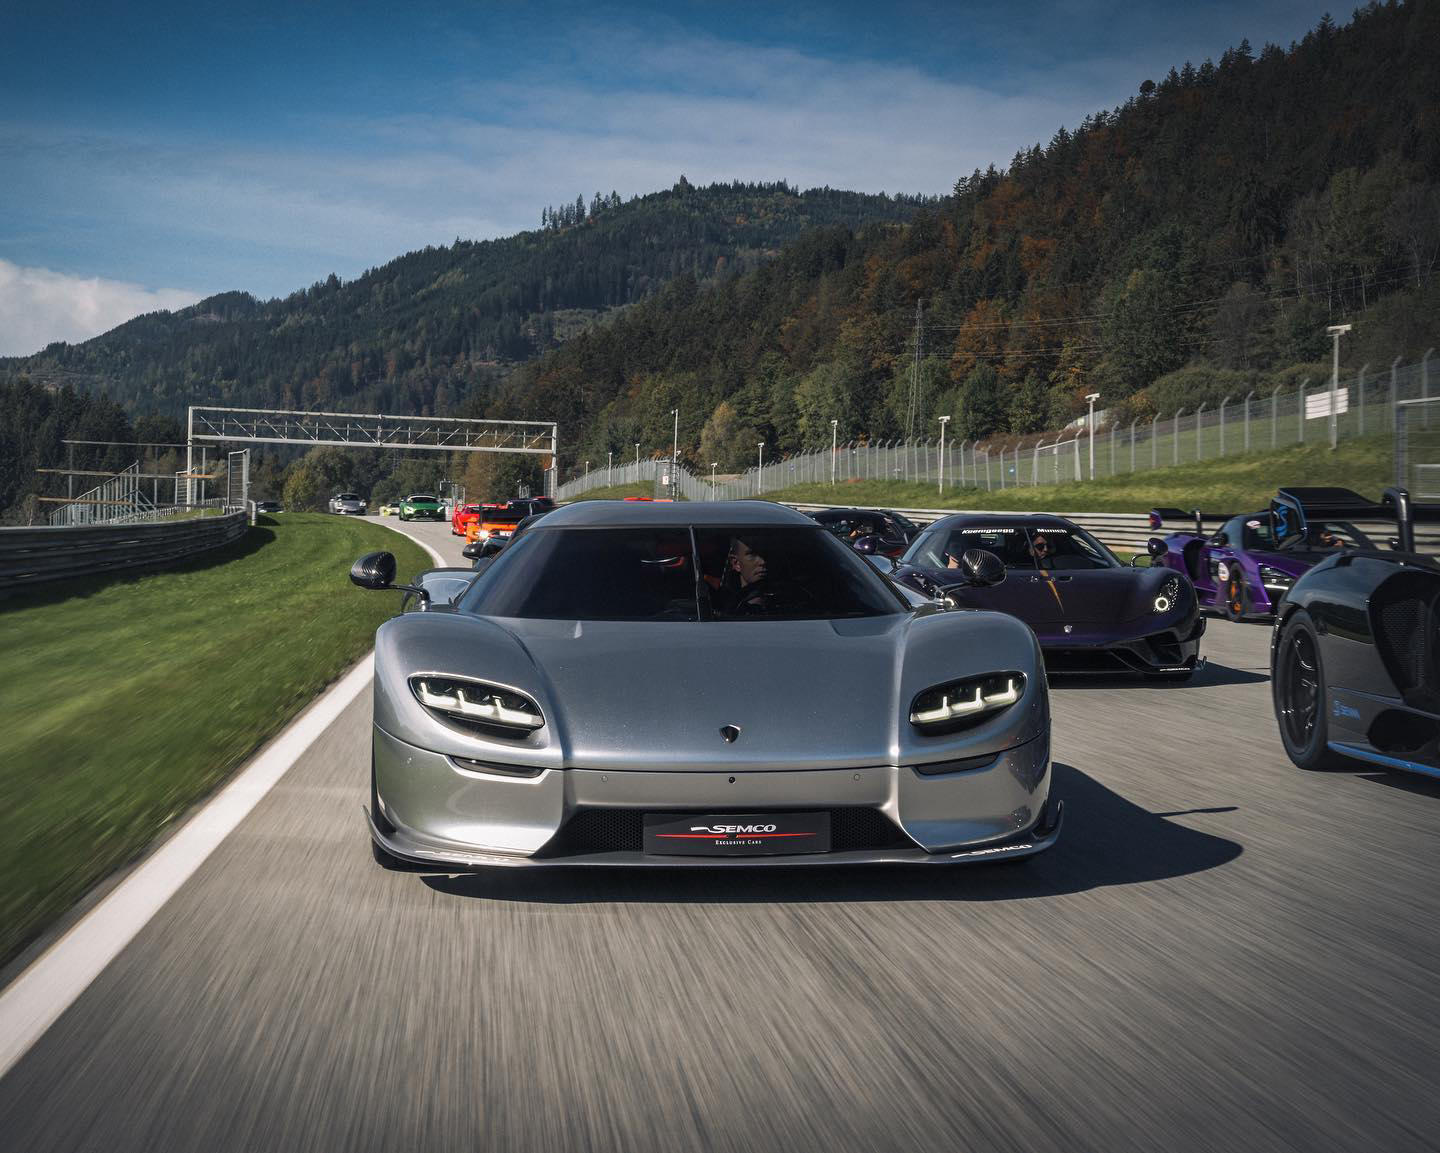 image  1 Koenigsegg - The CC850 making a debut at Redbull Ring, together with the Regera and Agera One of 1